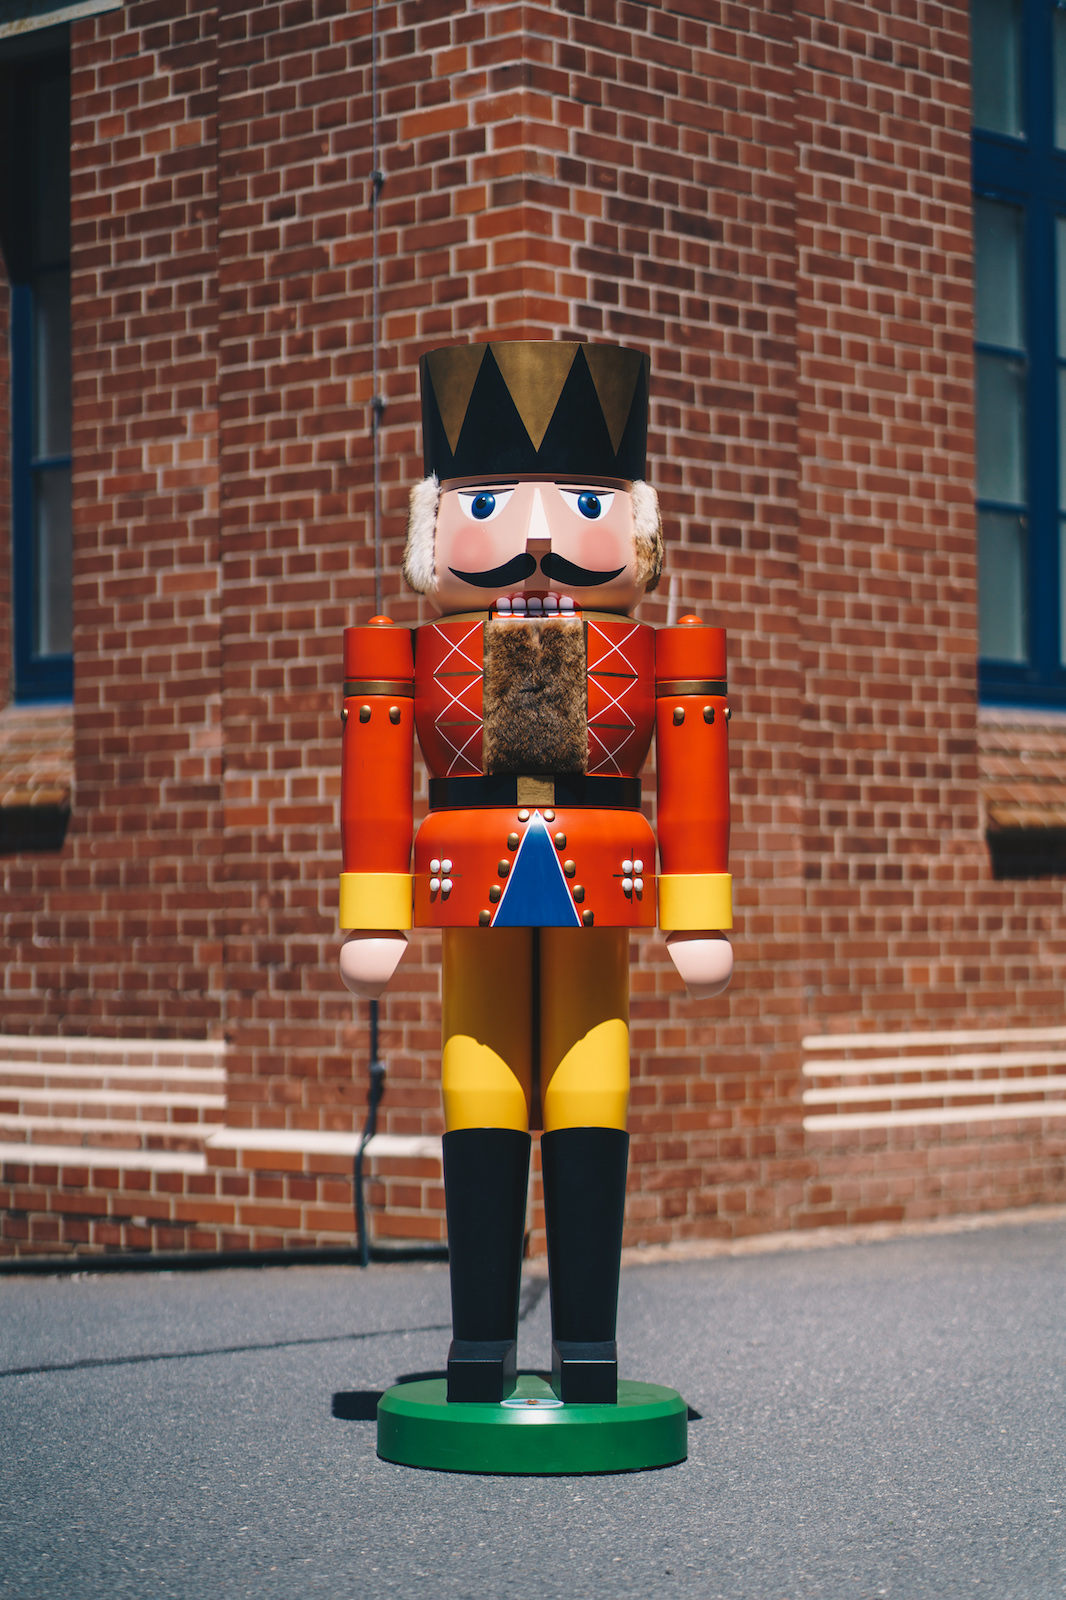 Large Christmas Nutcracker Statue from the Ore Mountains